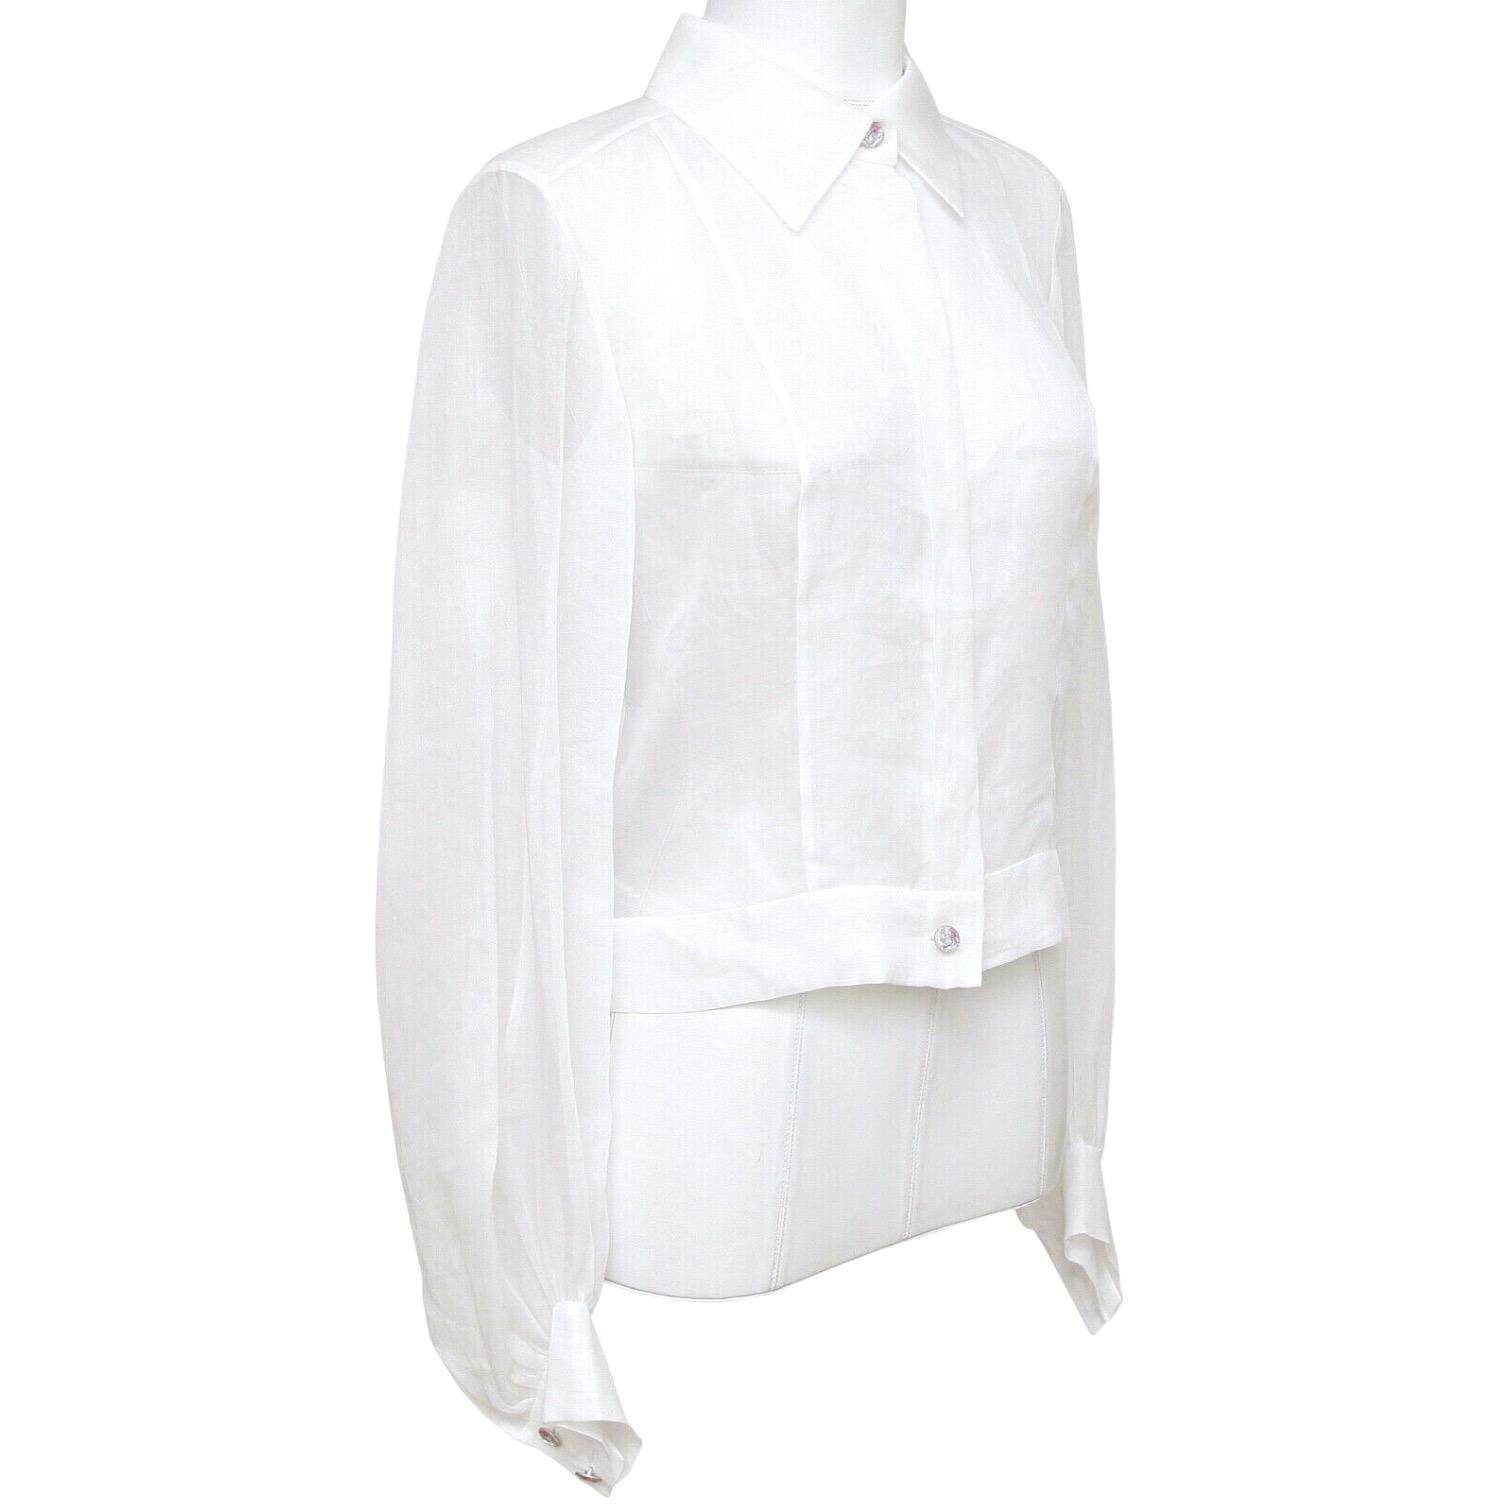 GUARANTEED AUTHENTIC CHANEL 2017 CRUISE WHITE COTTON BLOUSE W/TAGS

Design:
 - Long sleeve lightweight white blouse from the 2017 Collection.
 - Button down front.
 - Two buttons at each cuff.
 - Pointed collar.
 - Comes with attached tag and extra